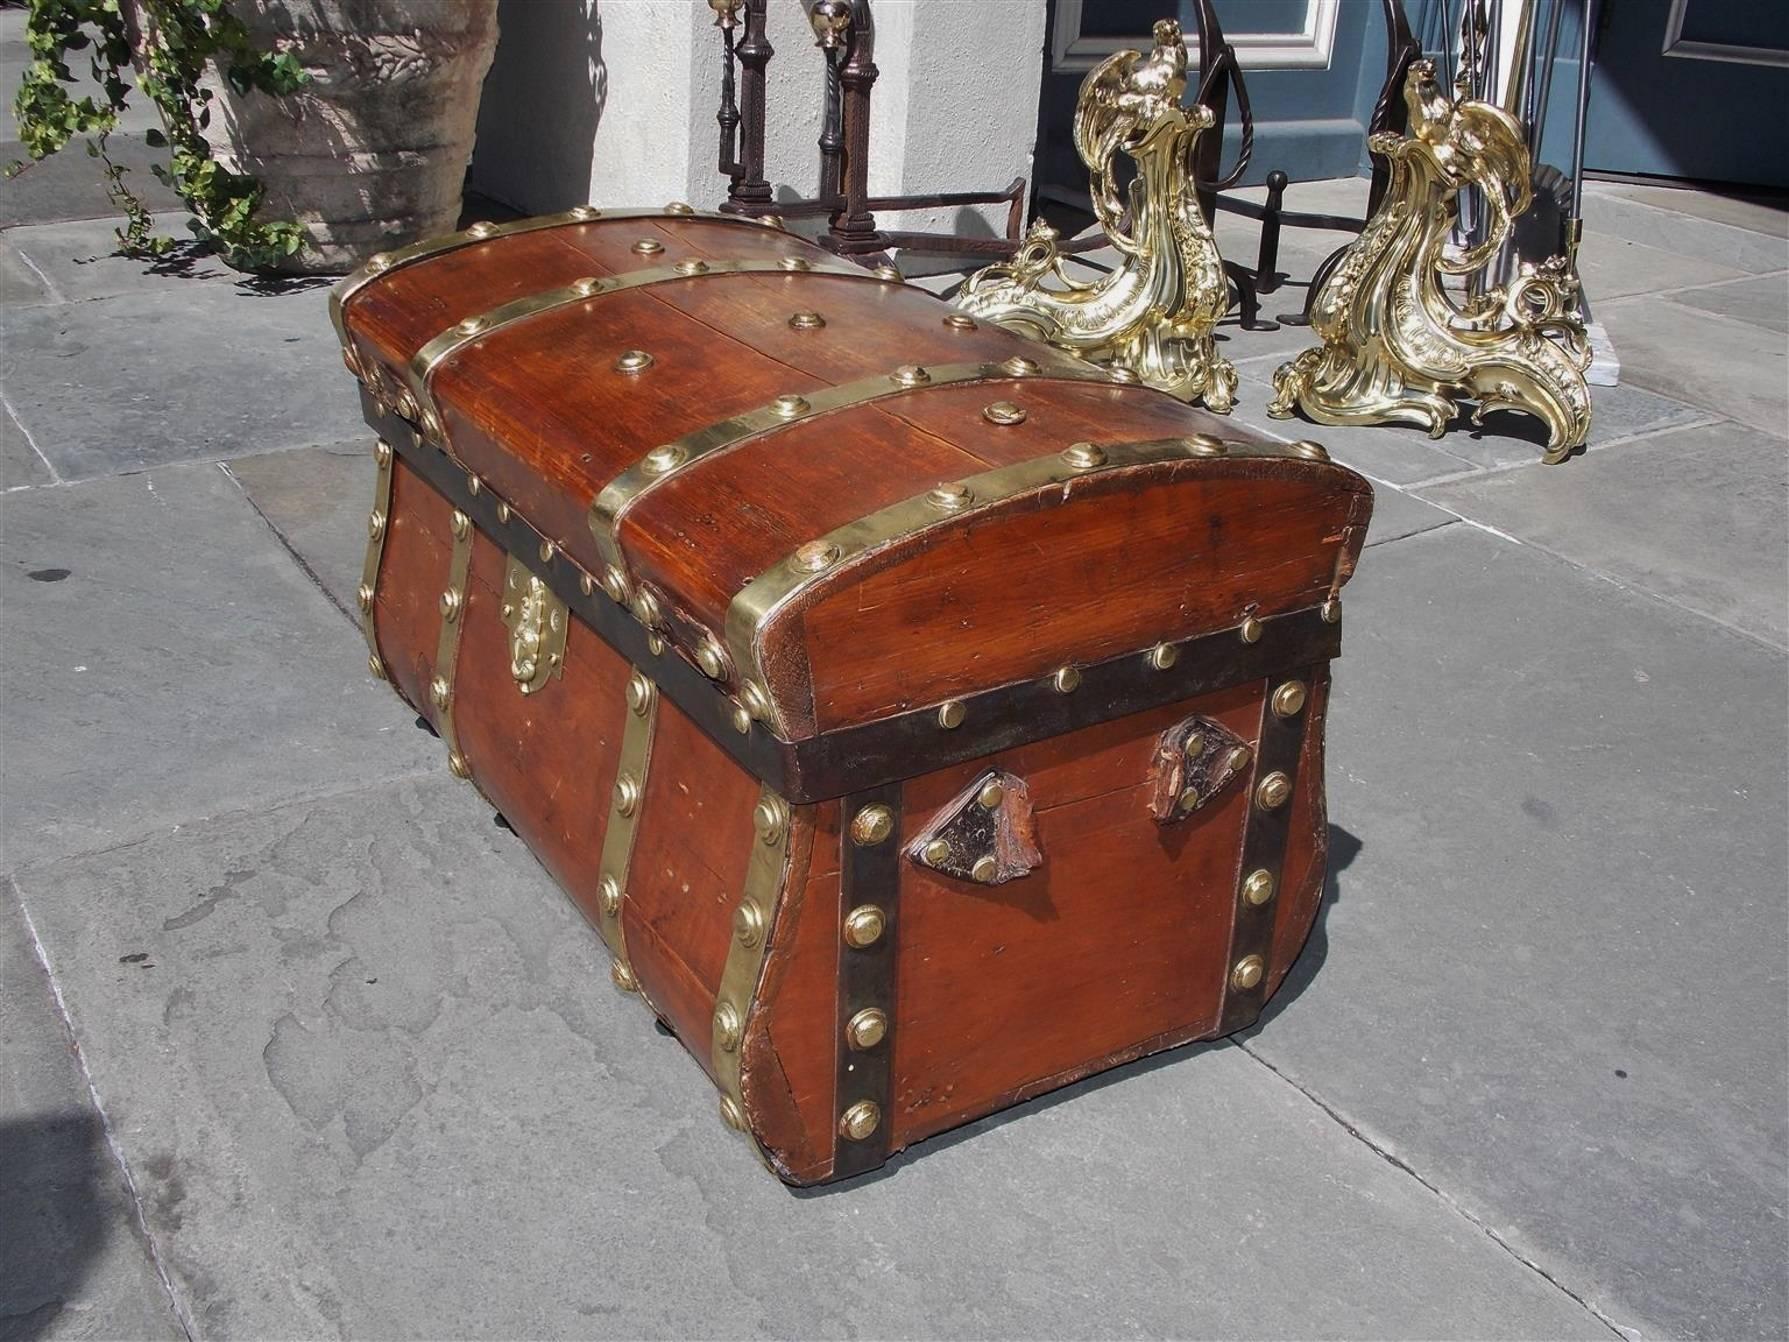 American Colonial American White Pine Brass and Leather Mounted Traveling Trunk, Circa 1800